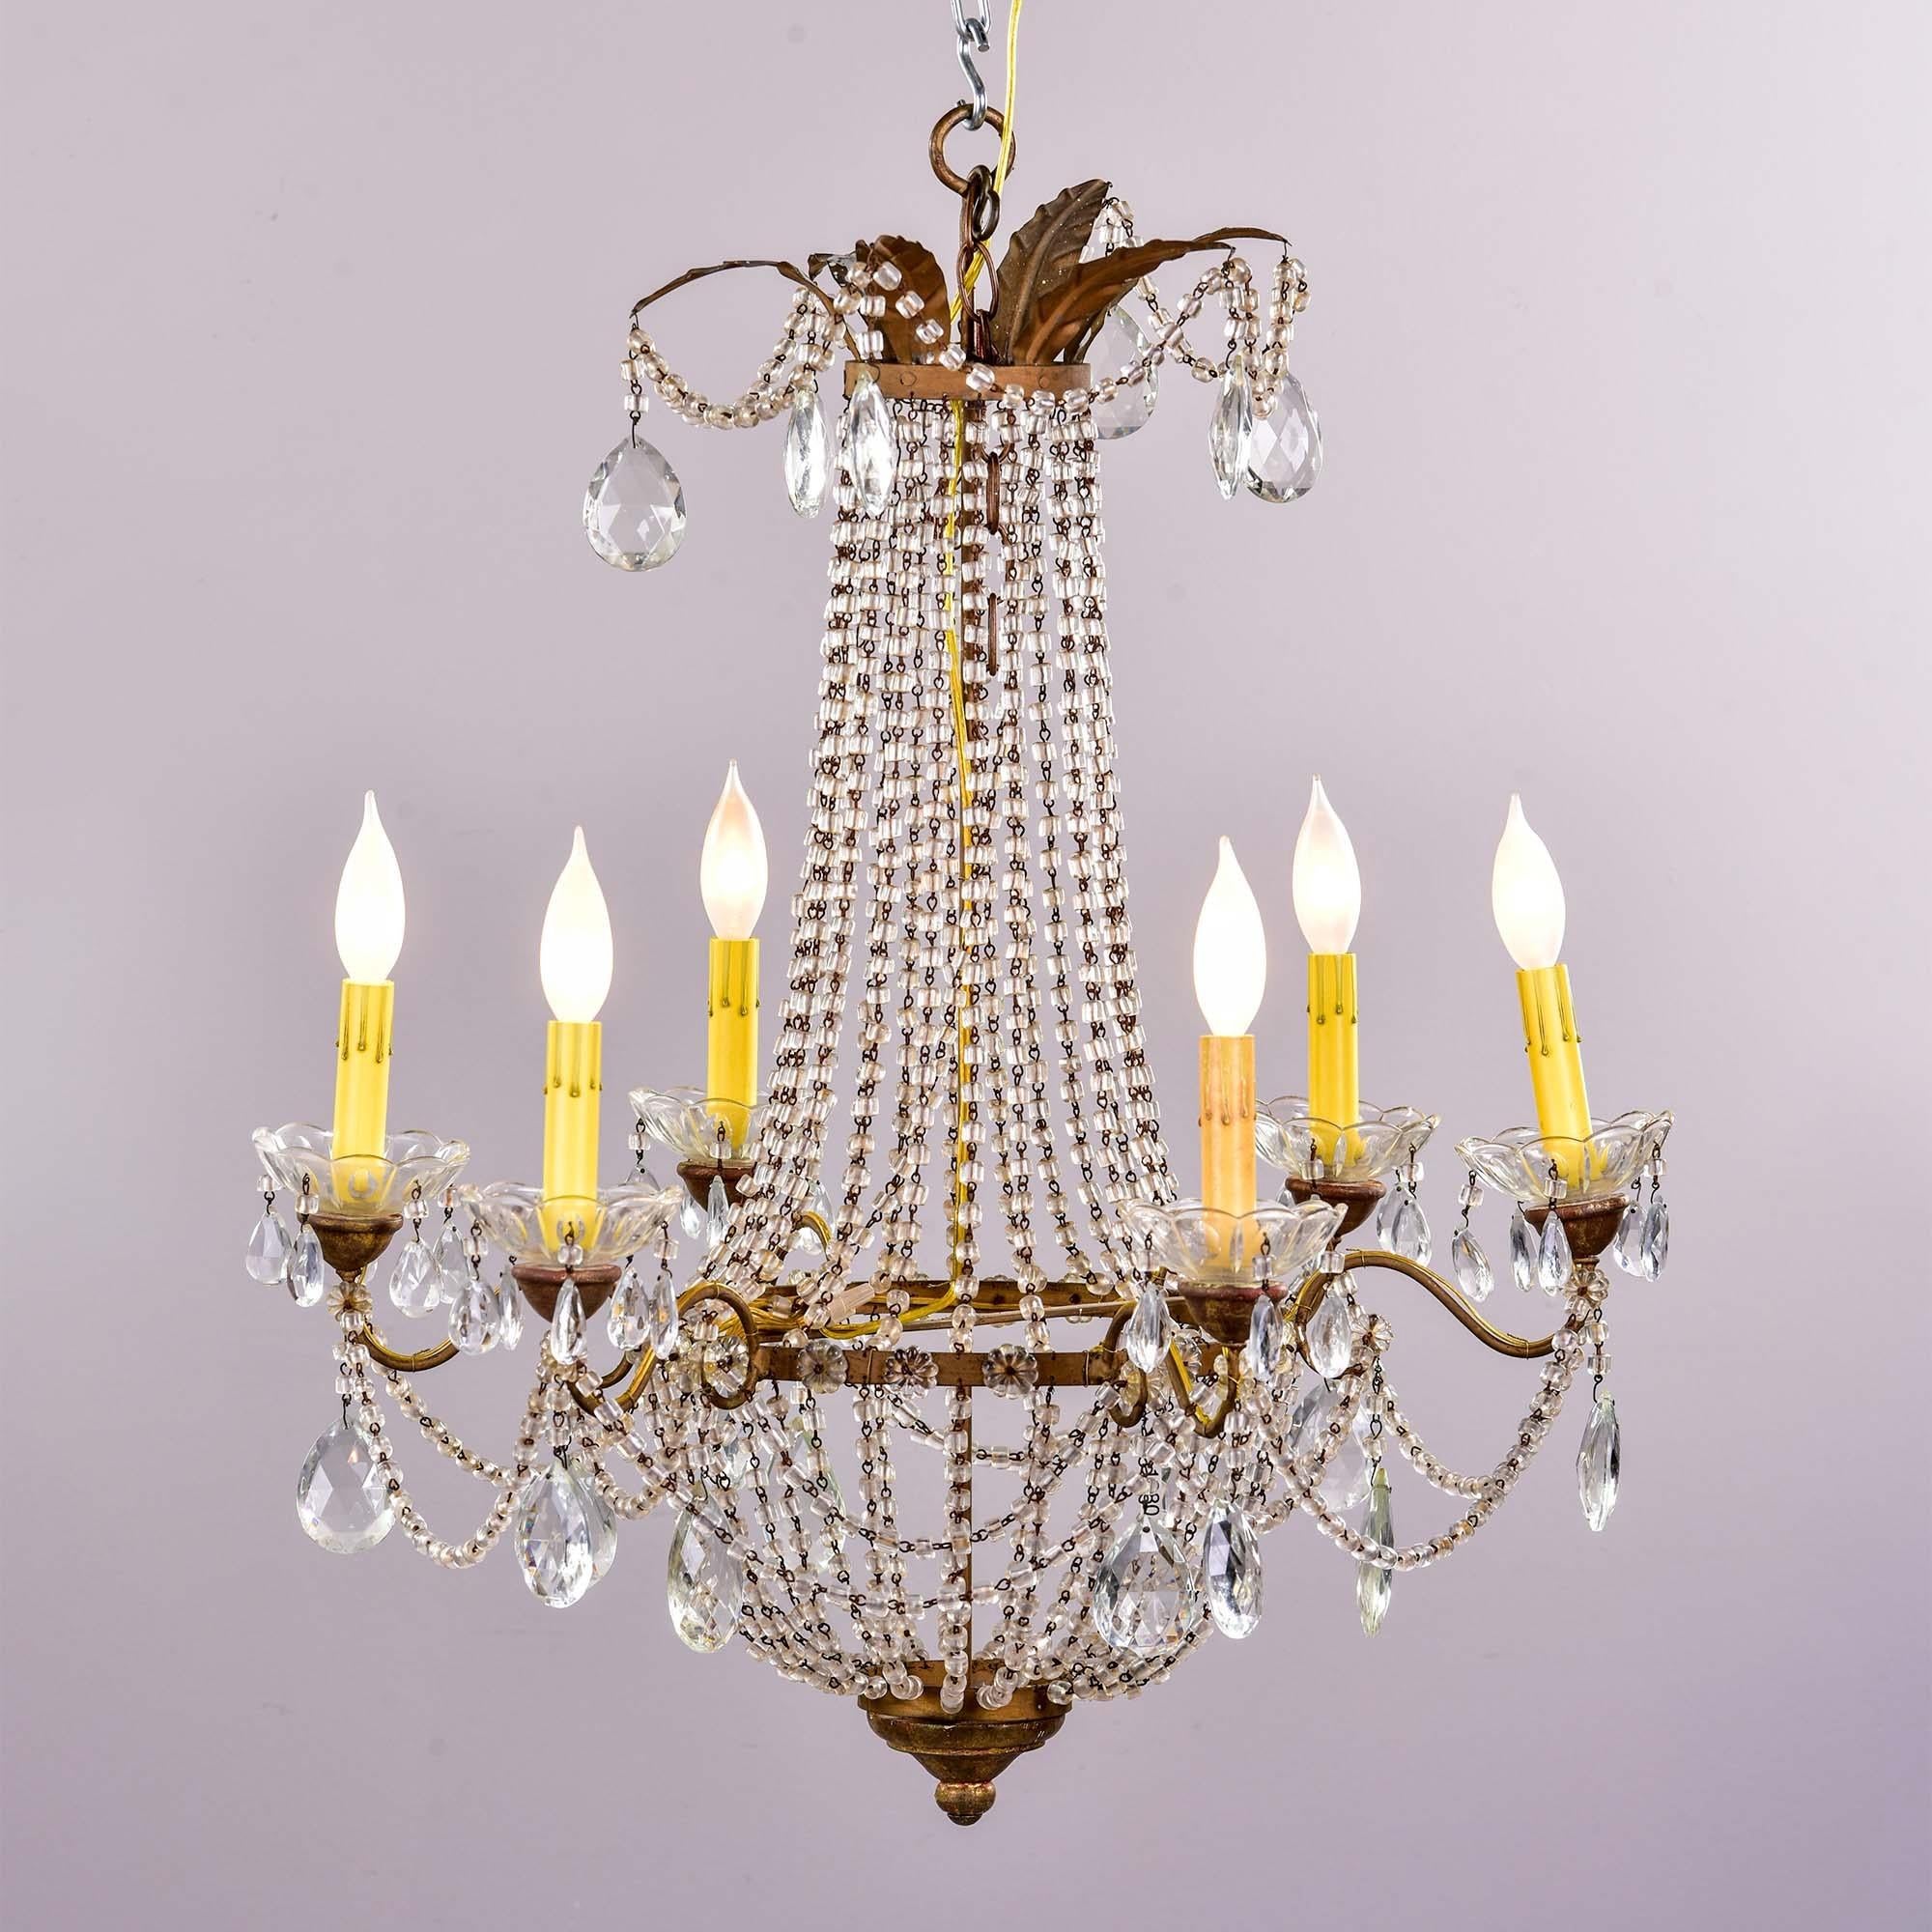 Early 20th C Empire style six light chandelier

Found in Belgium, this circa 1930s empire style chandelier features six candle style lights surrounding a basket form bowl created with draped strings of clear, barrel shaped crystals. Each light has